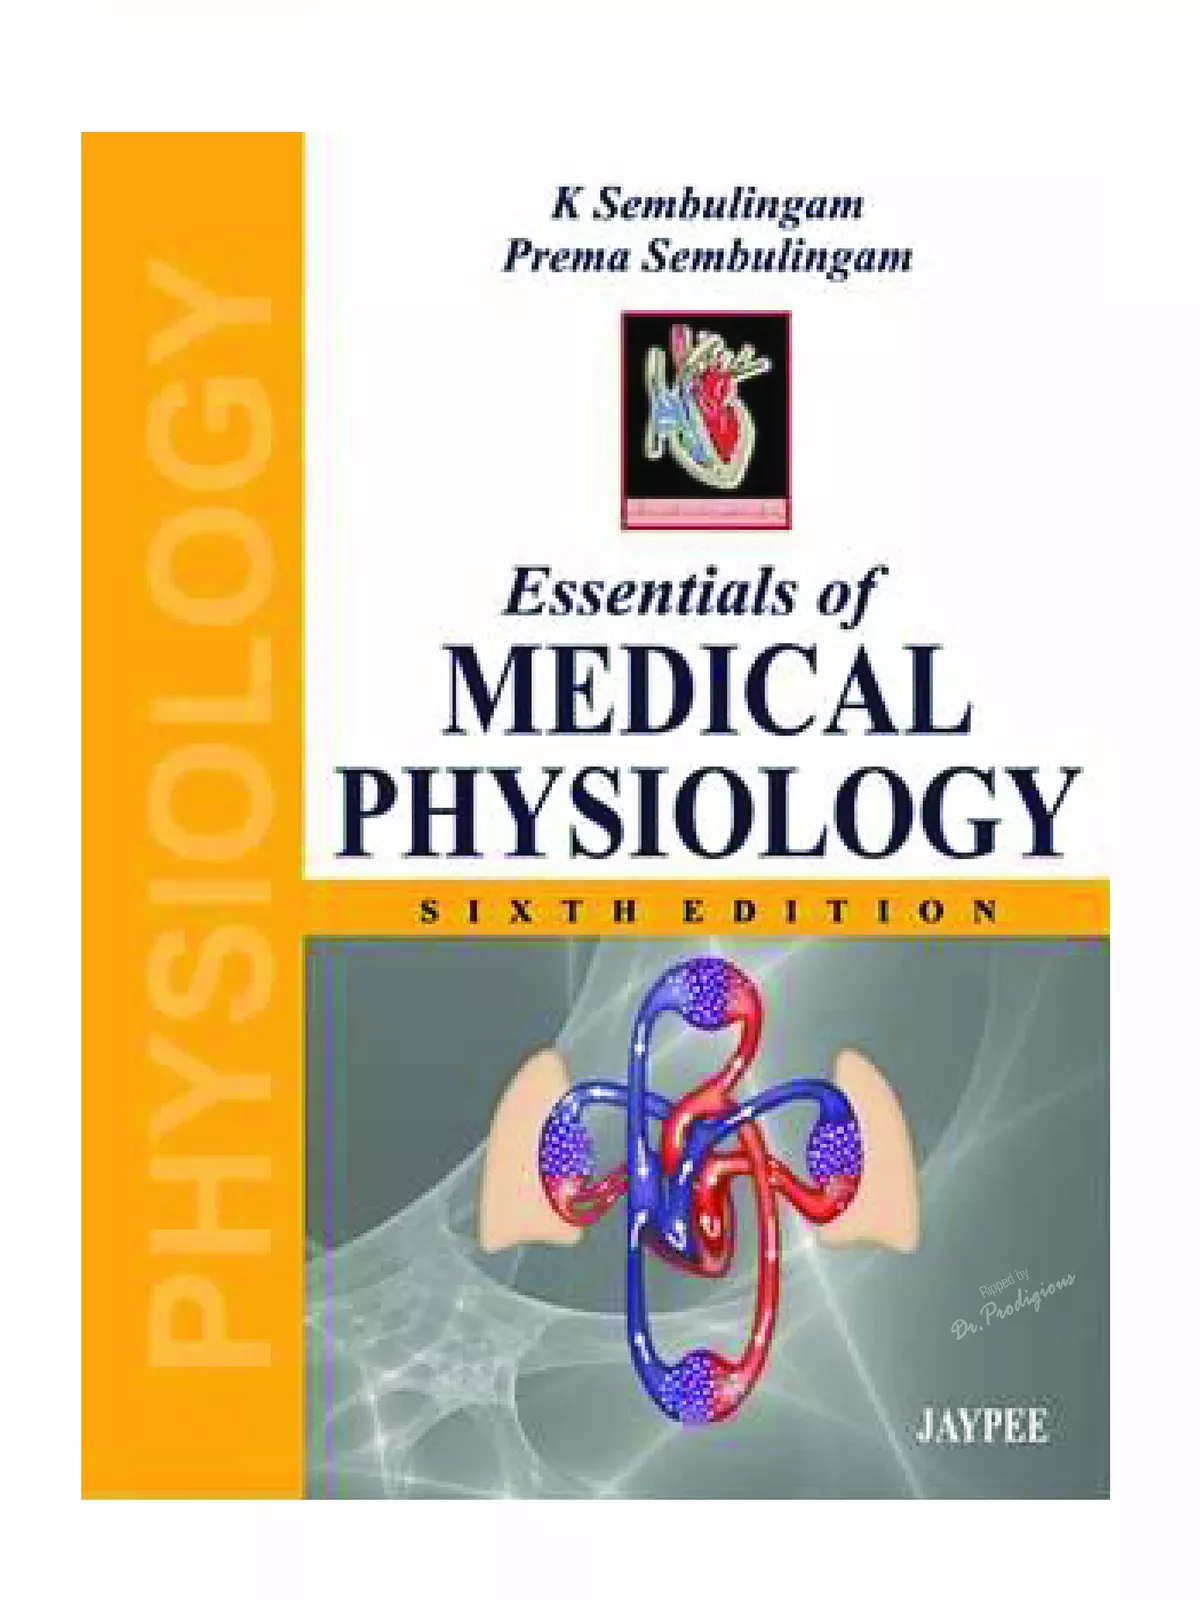 Essentials of Medical Physiology 6th Edition